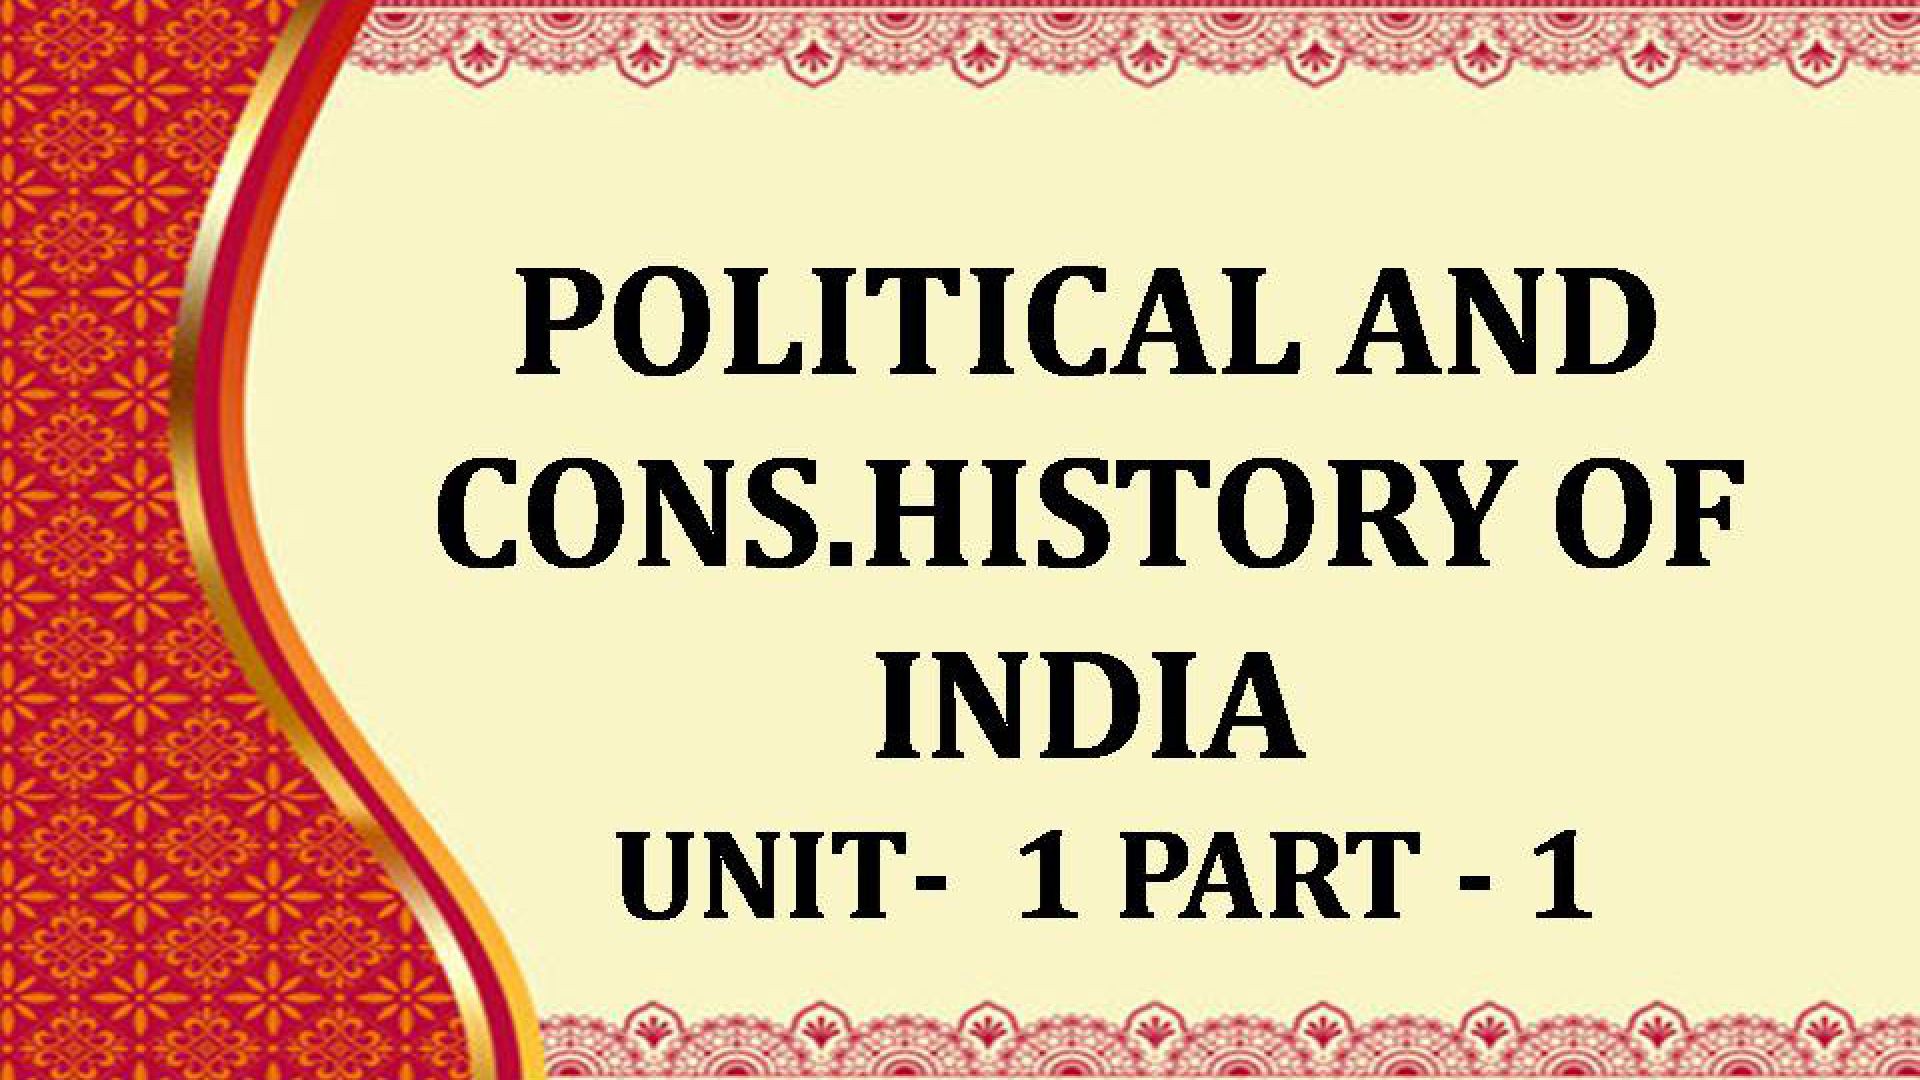 POLITICAL AND CONS.HISTORY OF INDIA UNIT 1 -1